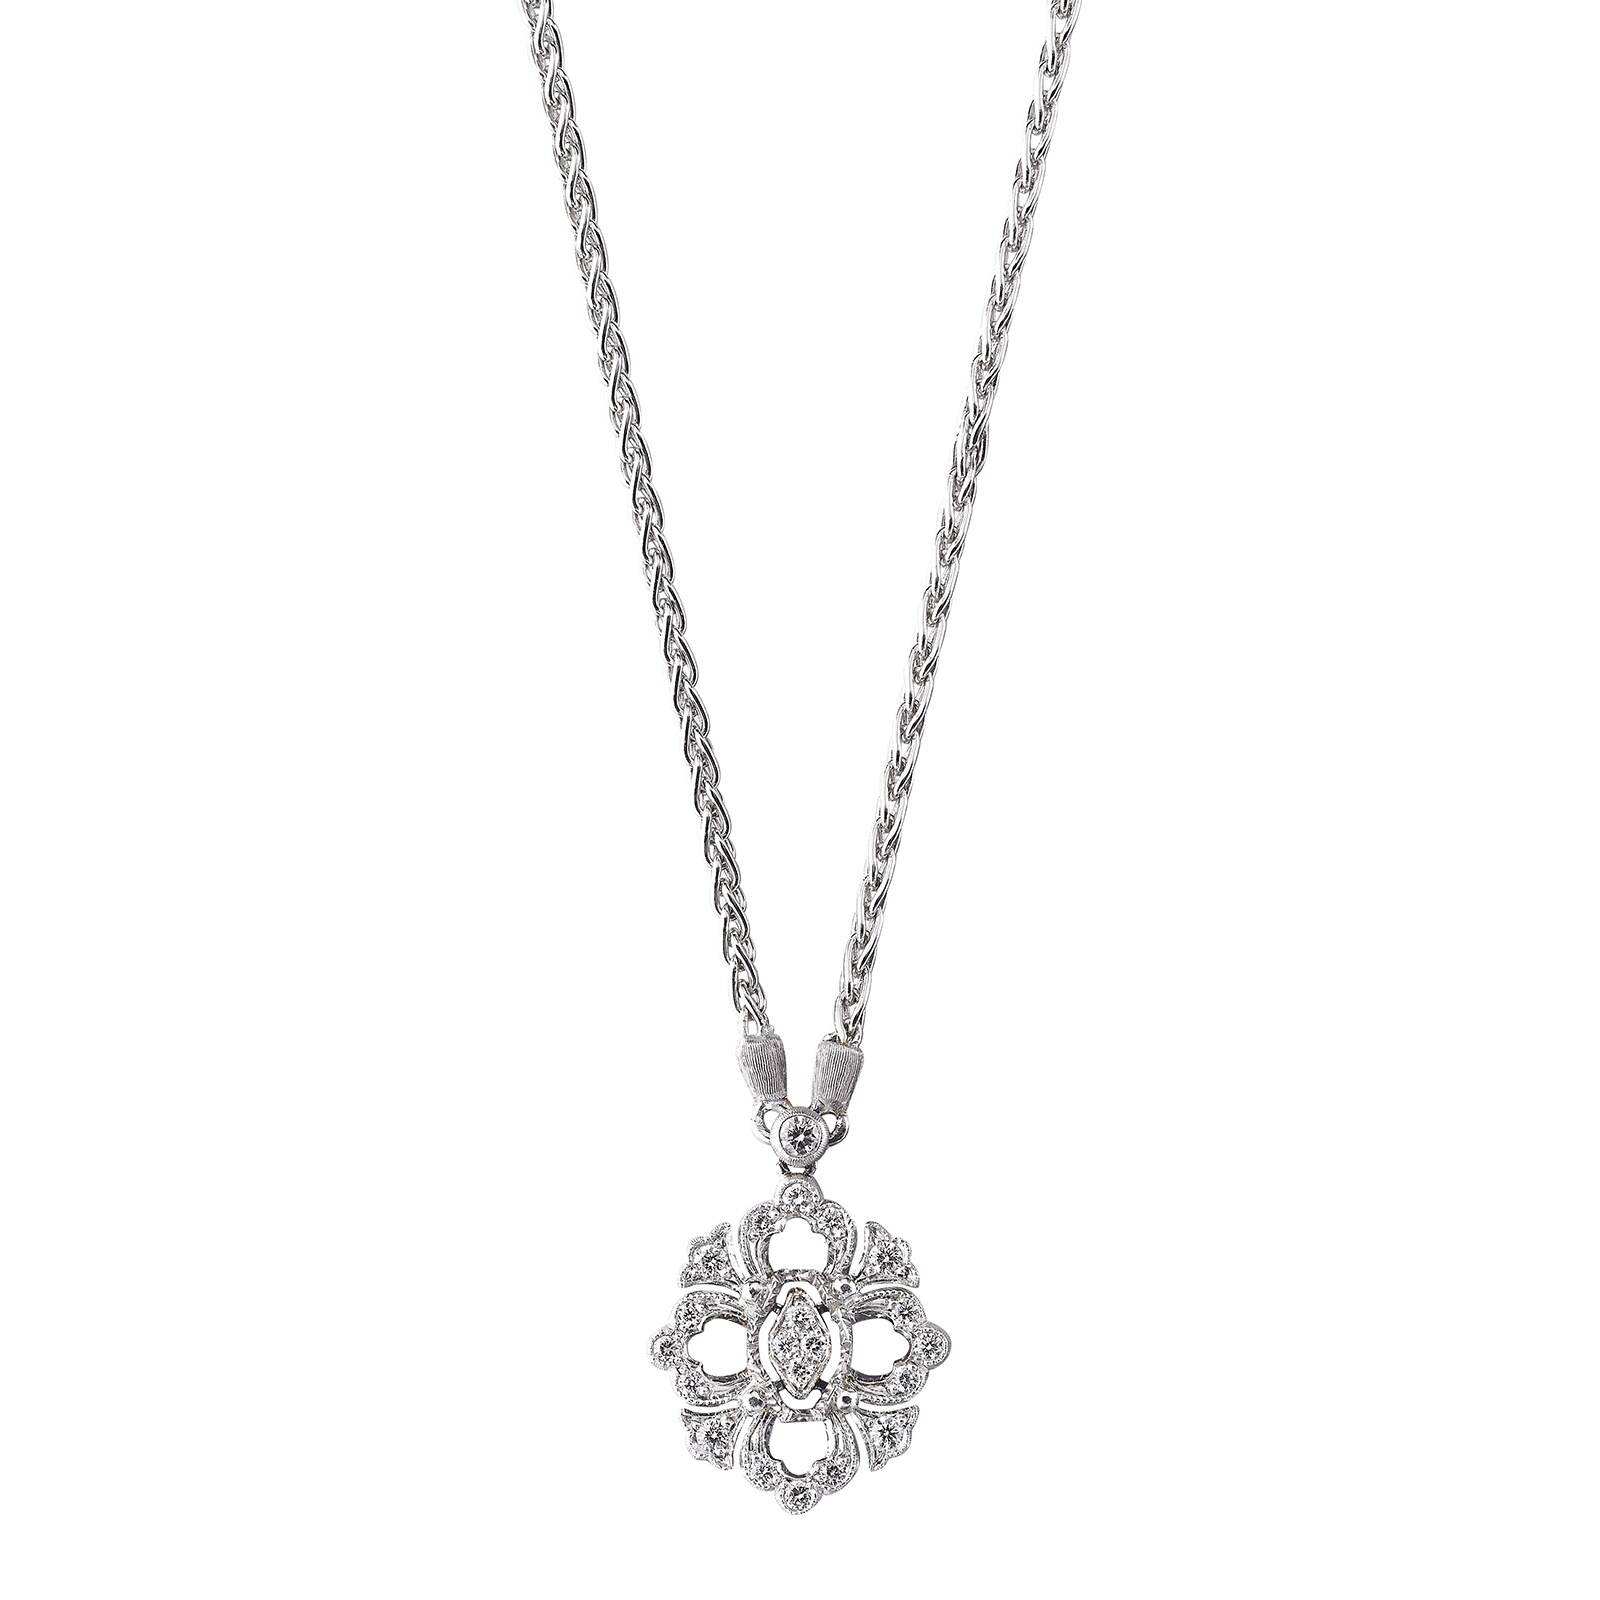 Necklet with diamond pave' - Necklaces - Categories - FOPE